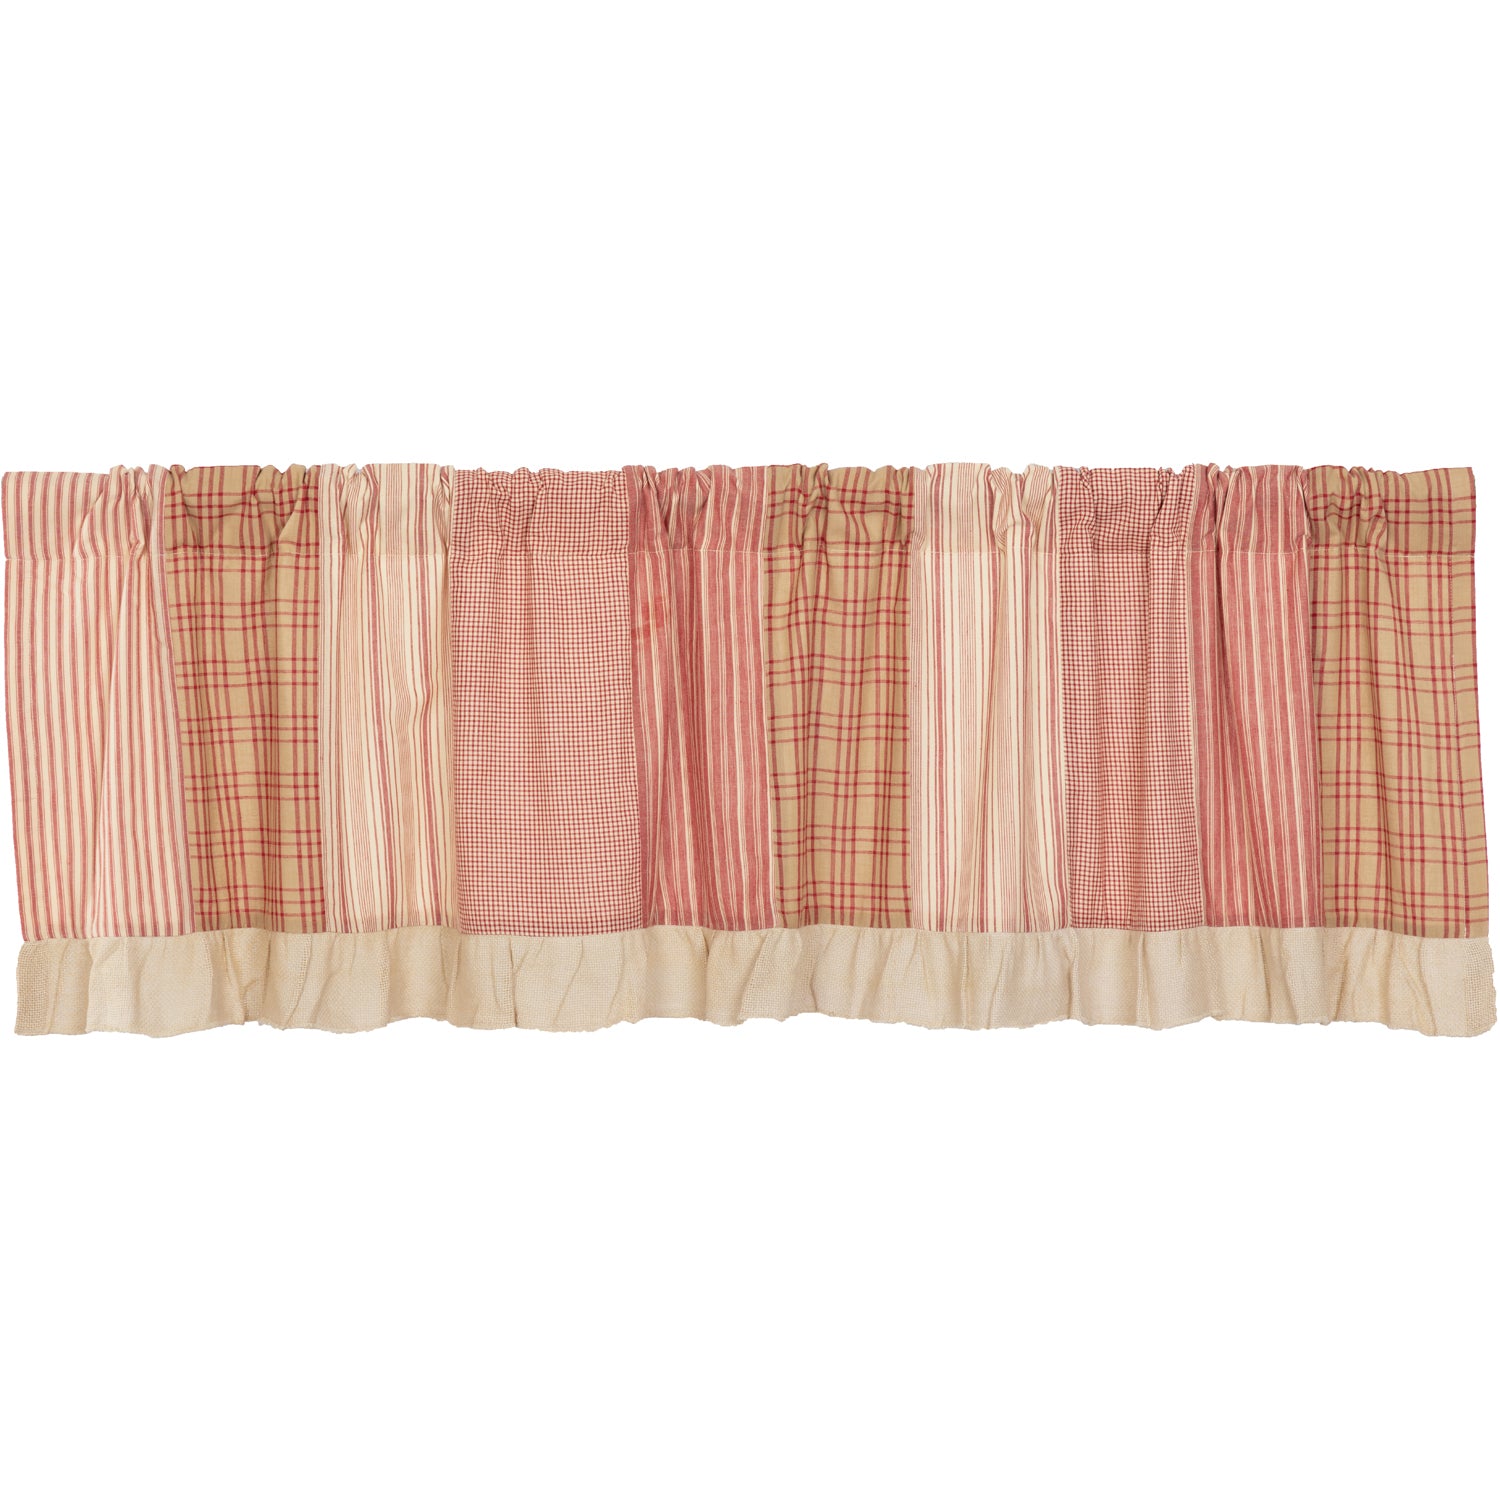 51964-Sawyer-Mill-Red-Patchwork-Valance-19x72-image-6